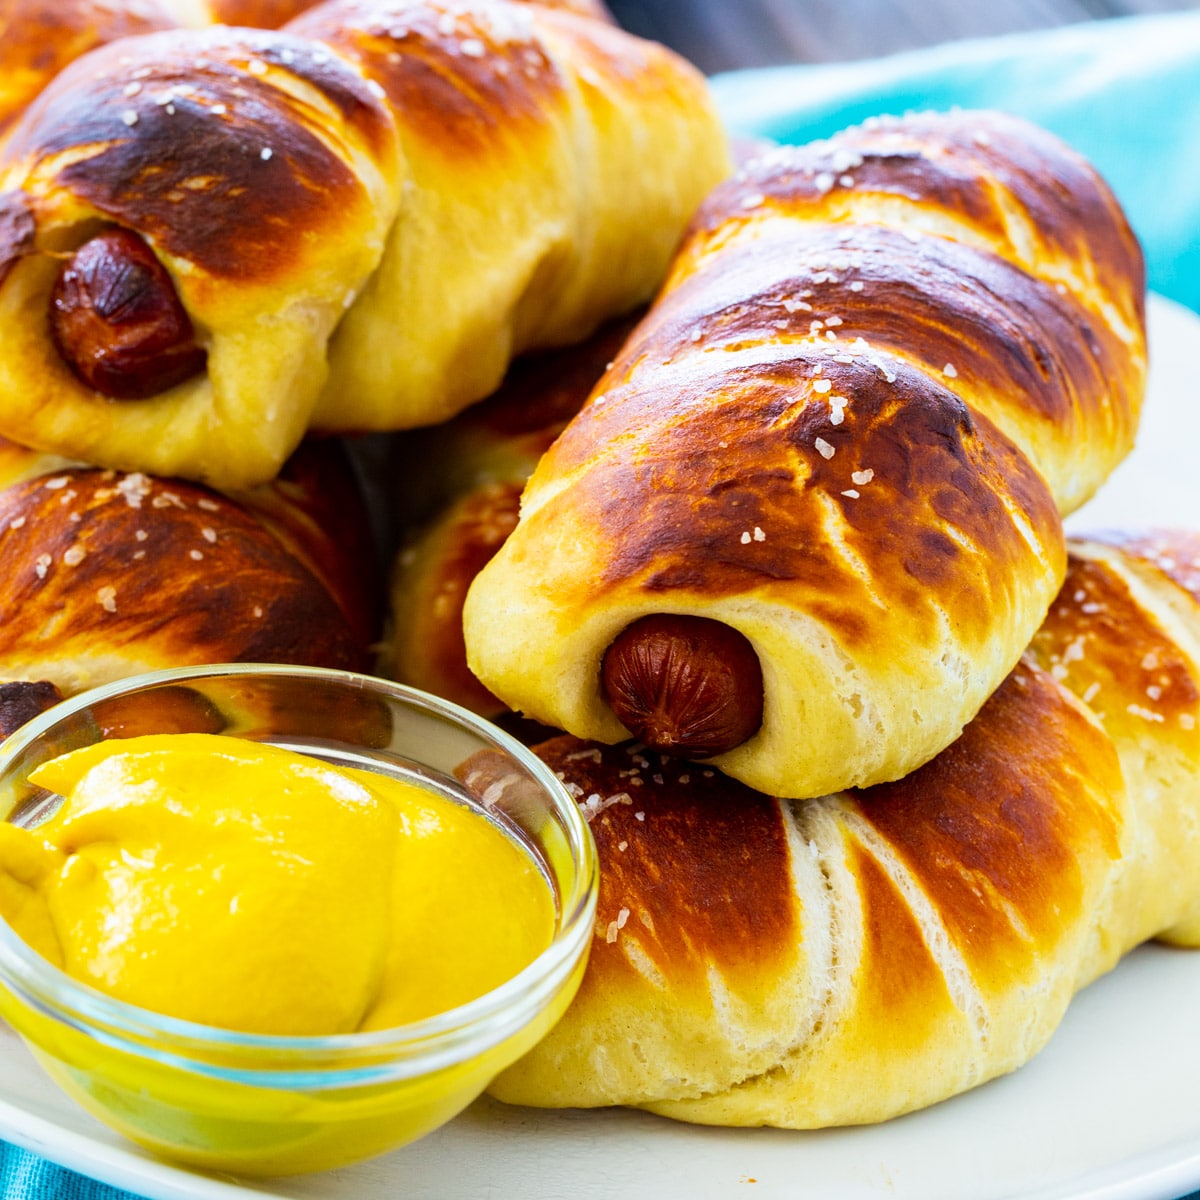 Pretzel Dogs piled on a plate with a small bowl of mustard.